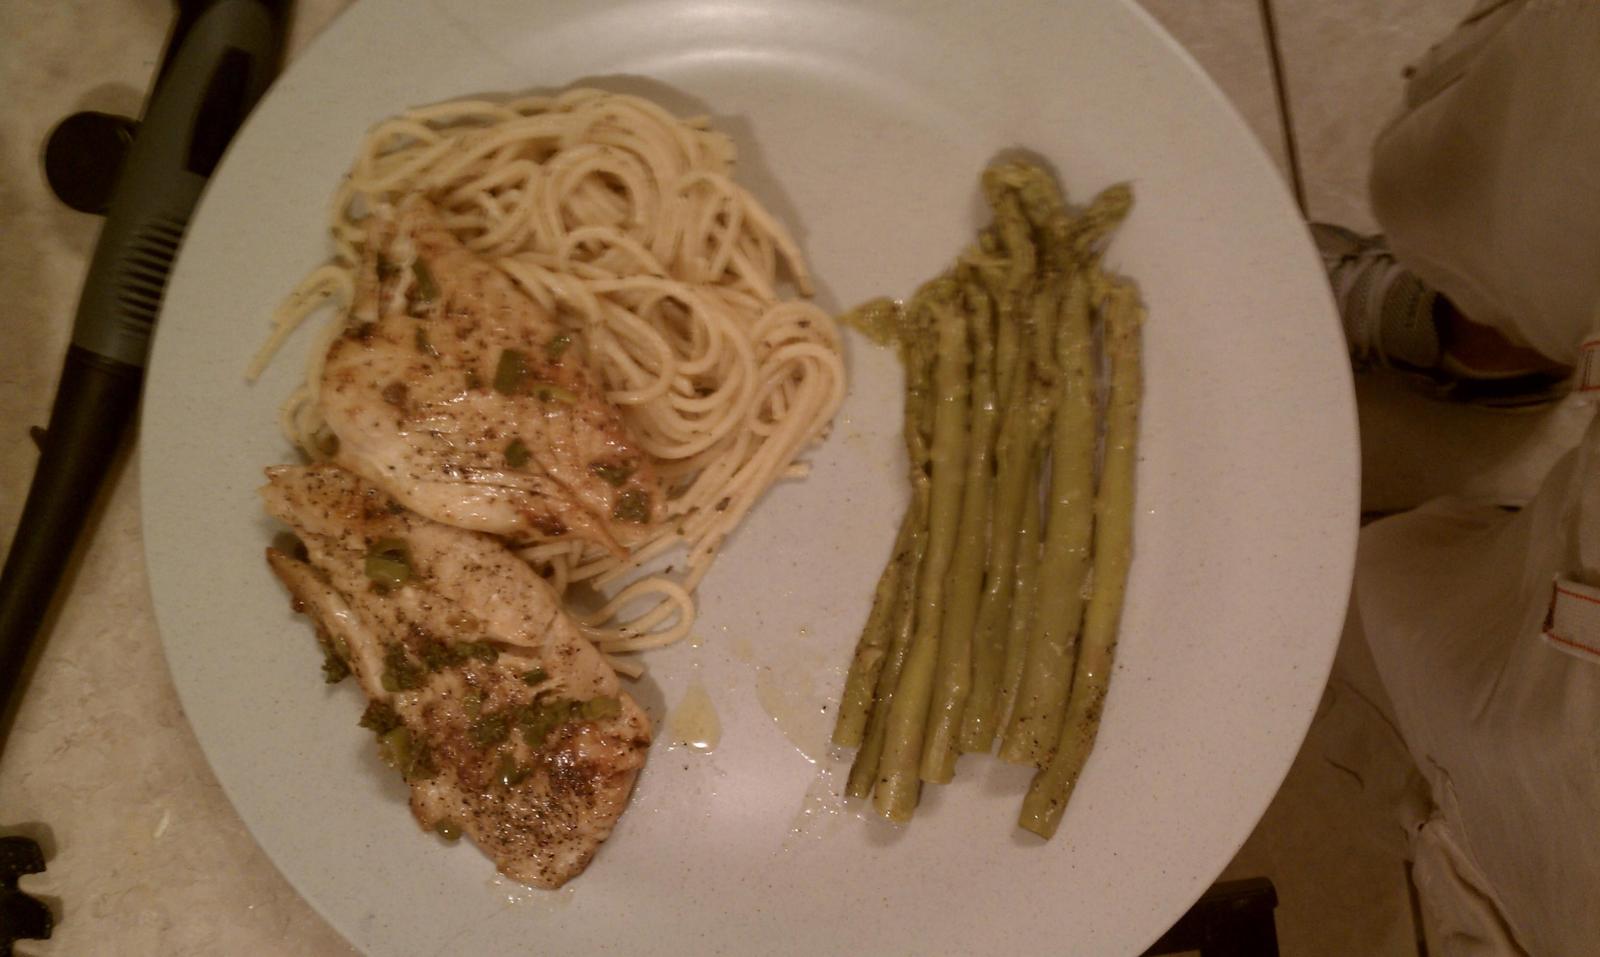 Absolutely delicious triggerfish dish served over pasta with fresh asparagus... if anyone wants a taste of some good ol cajun cooking, let me know and i will post the recipe